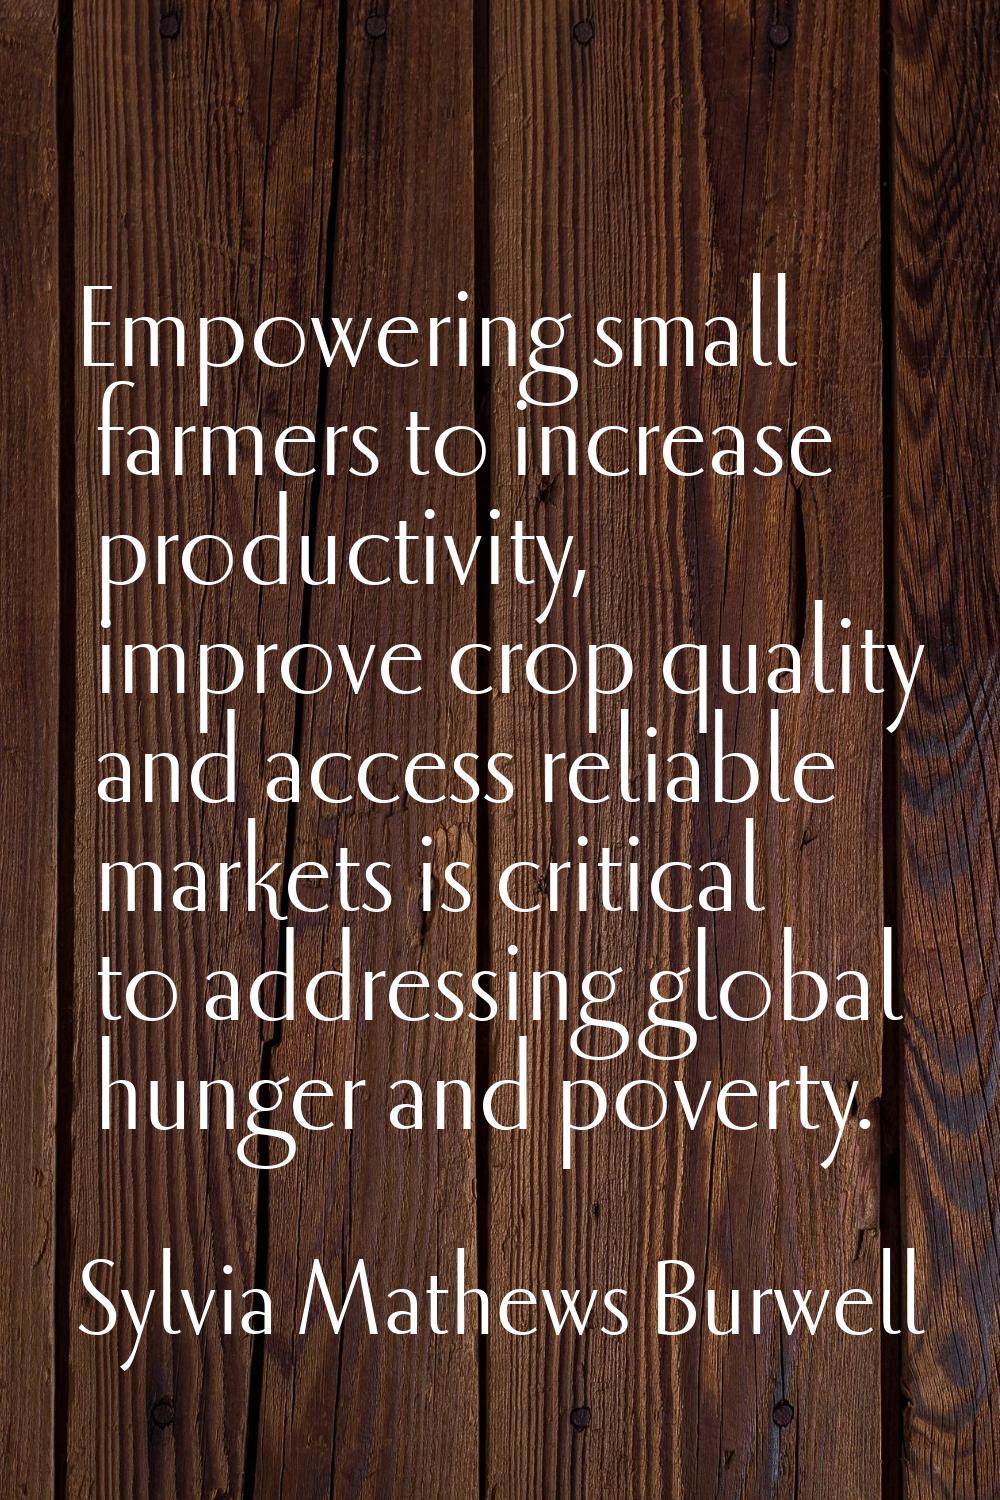 Empowering small farmers to increase productivity, improve crop quality and access reliable markets